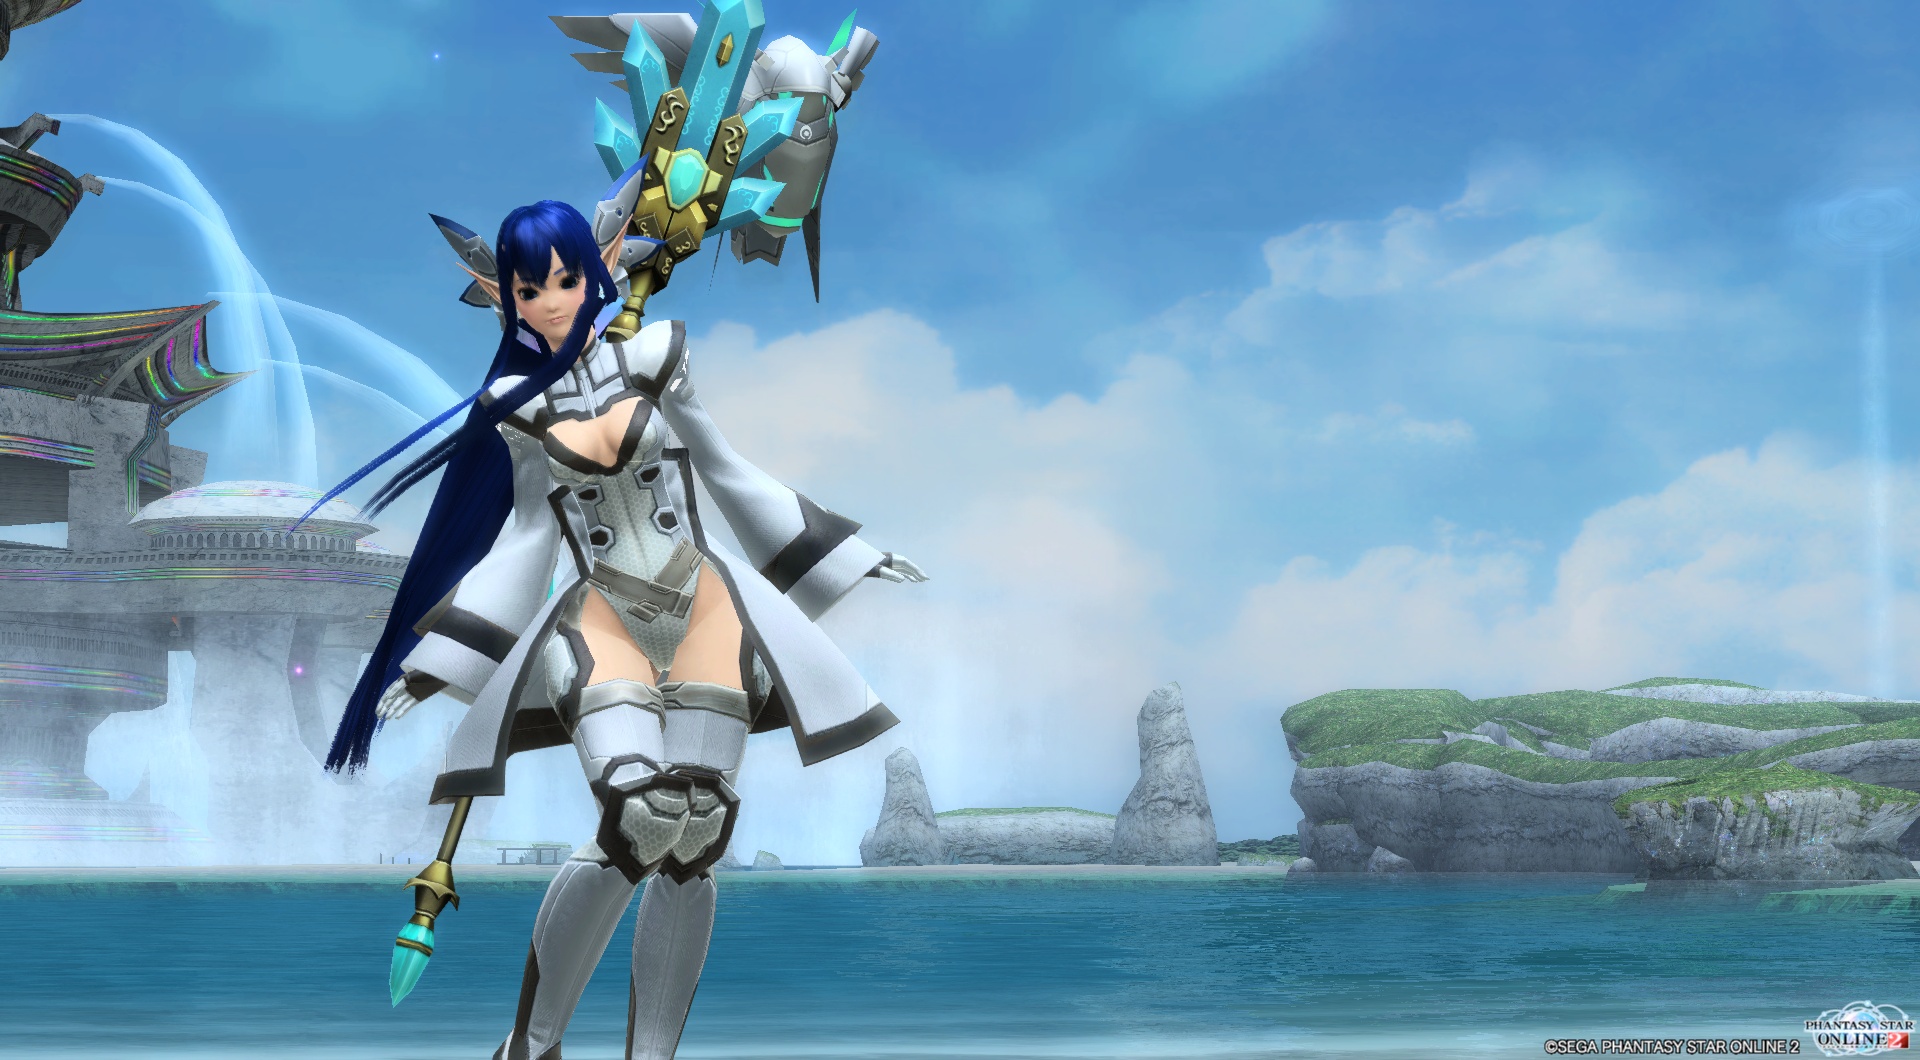 PSO2Fashionthread 2014 [Archive]-World.com Forums